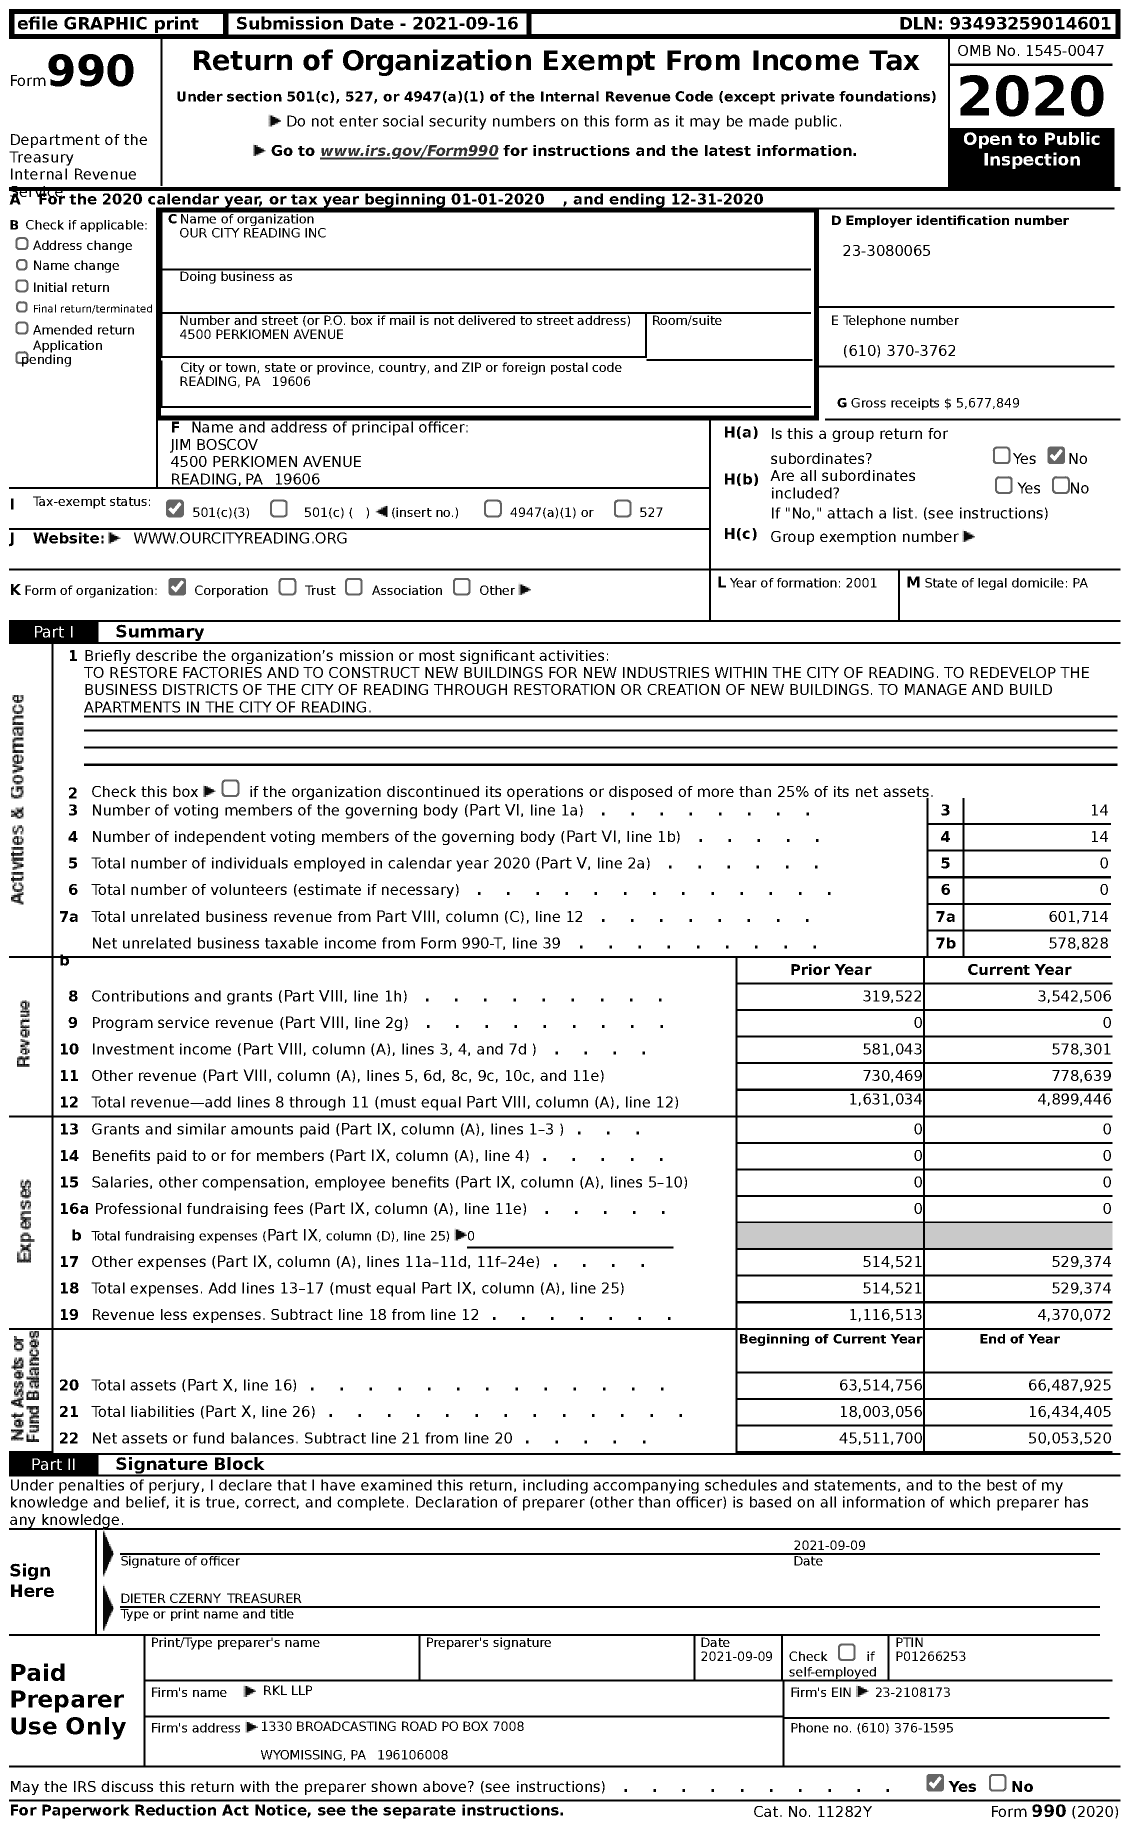 Image of first page of 2020 Form 990 for Our City Reading